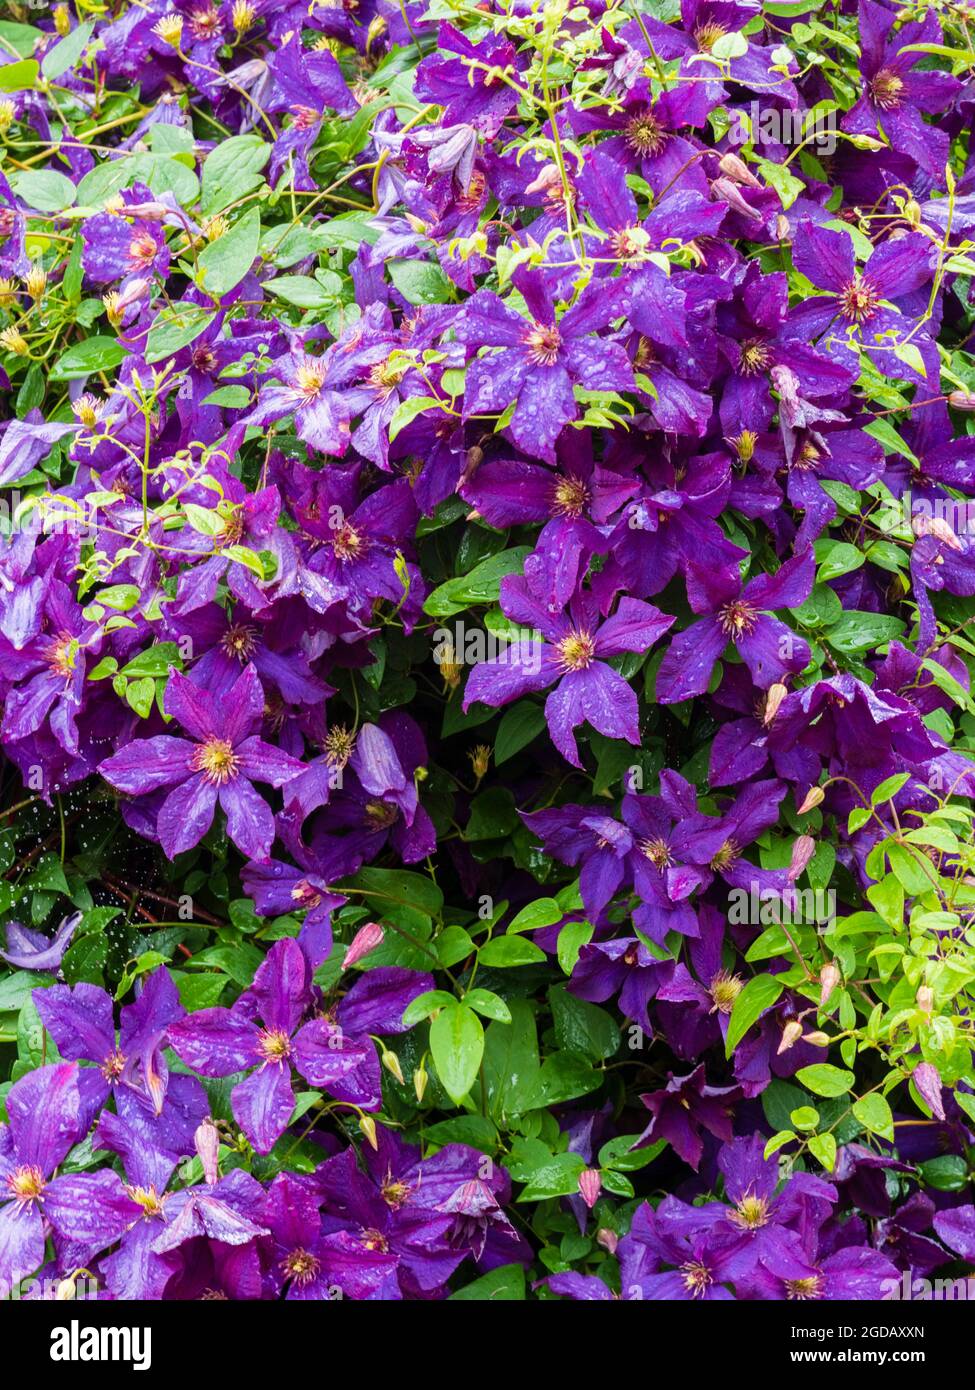 purple flowers of the Group 3, late summer blooming hardy climber, Clematis viticella 'Etoile Violette' Stock Photo